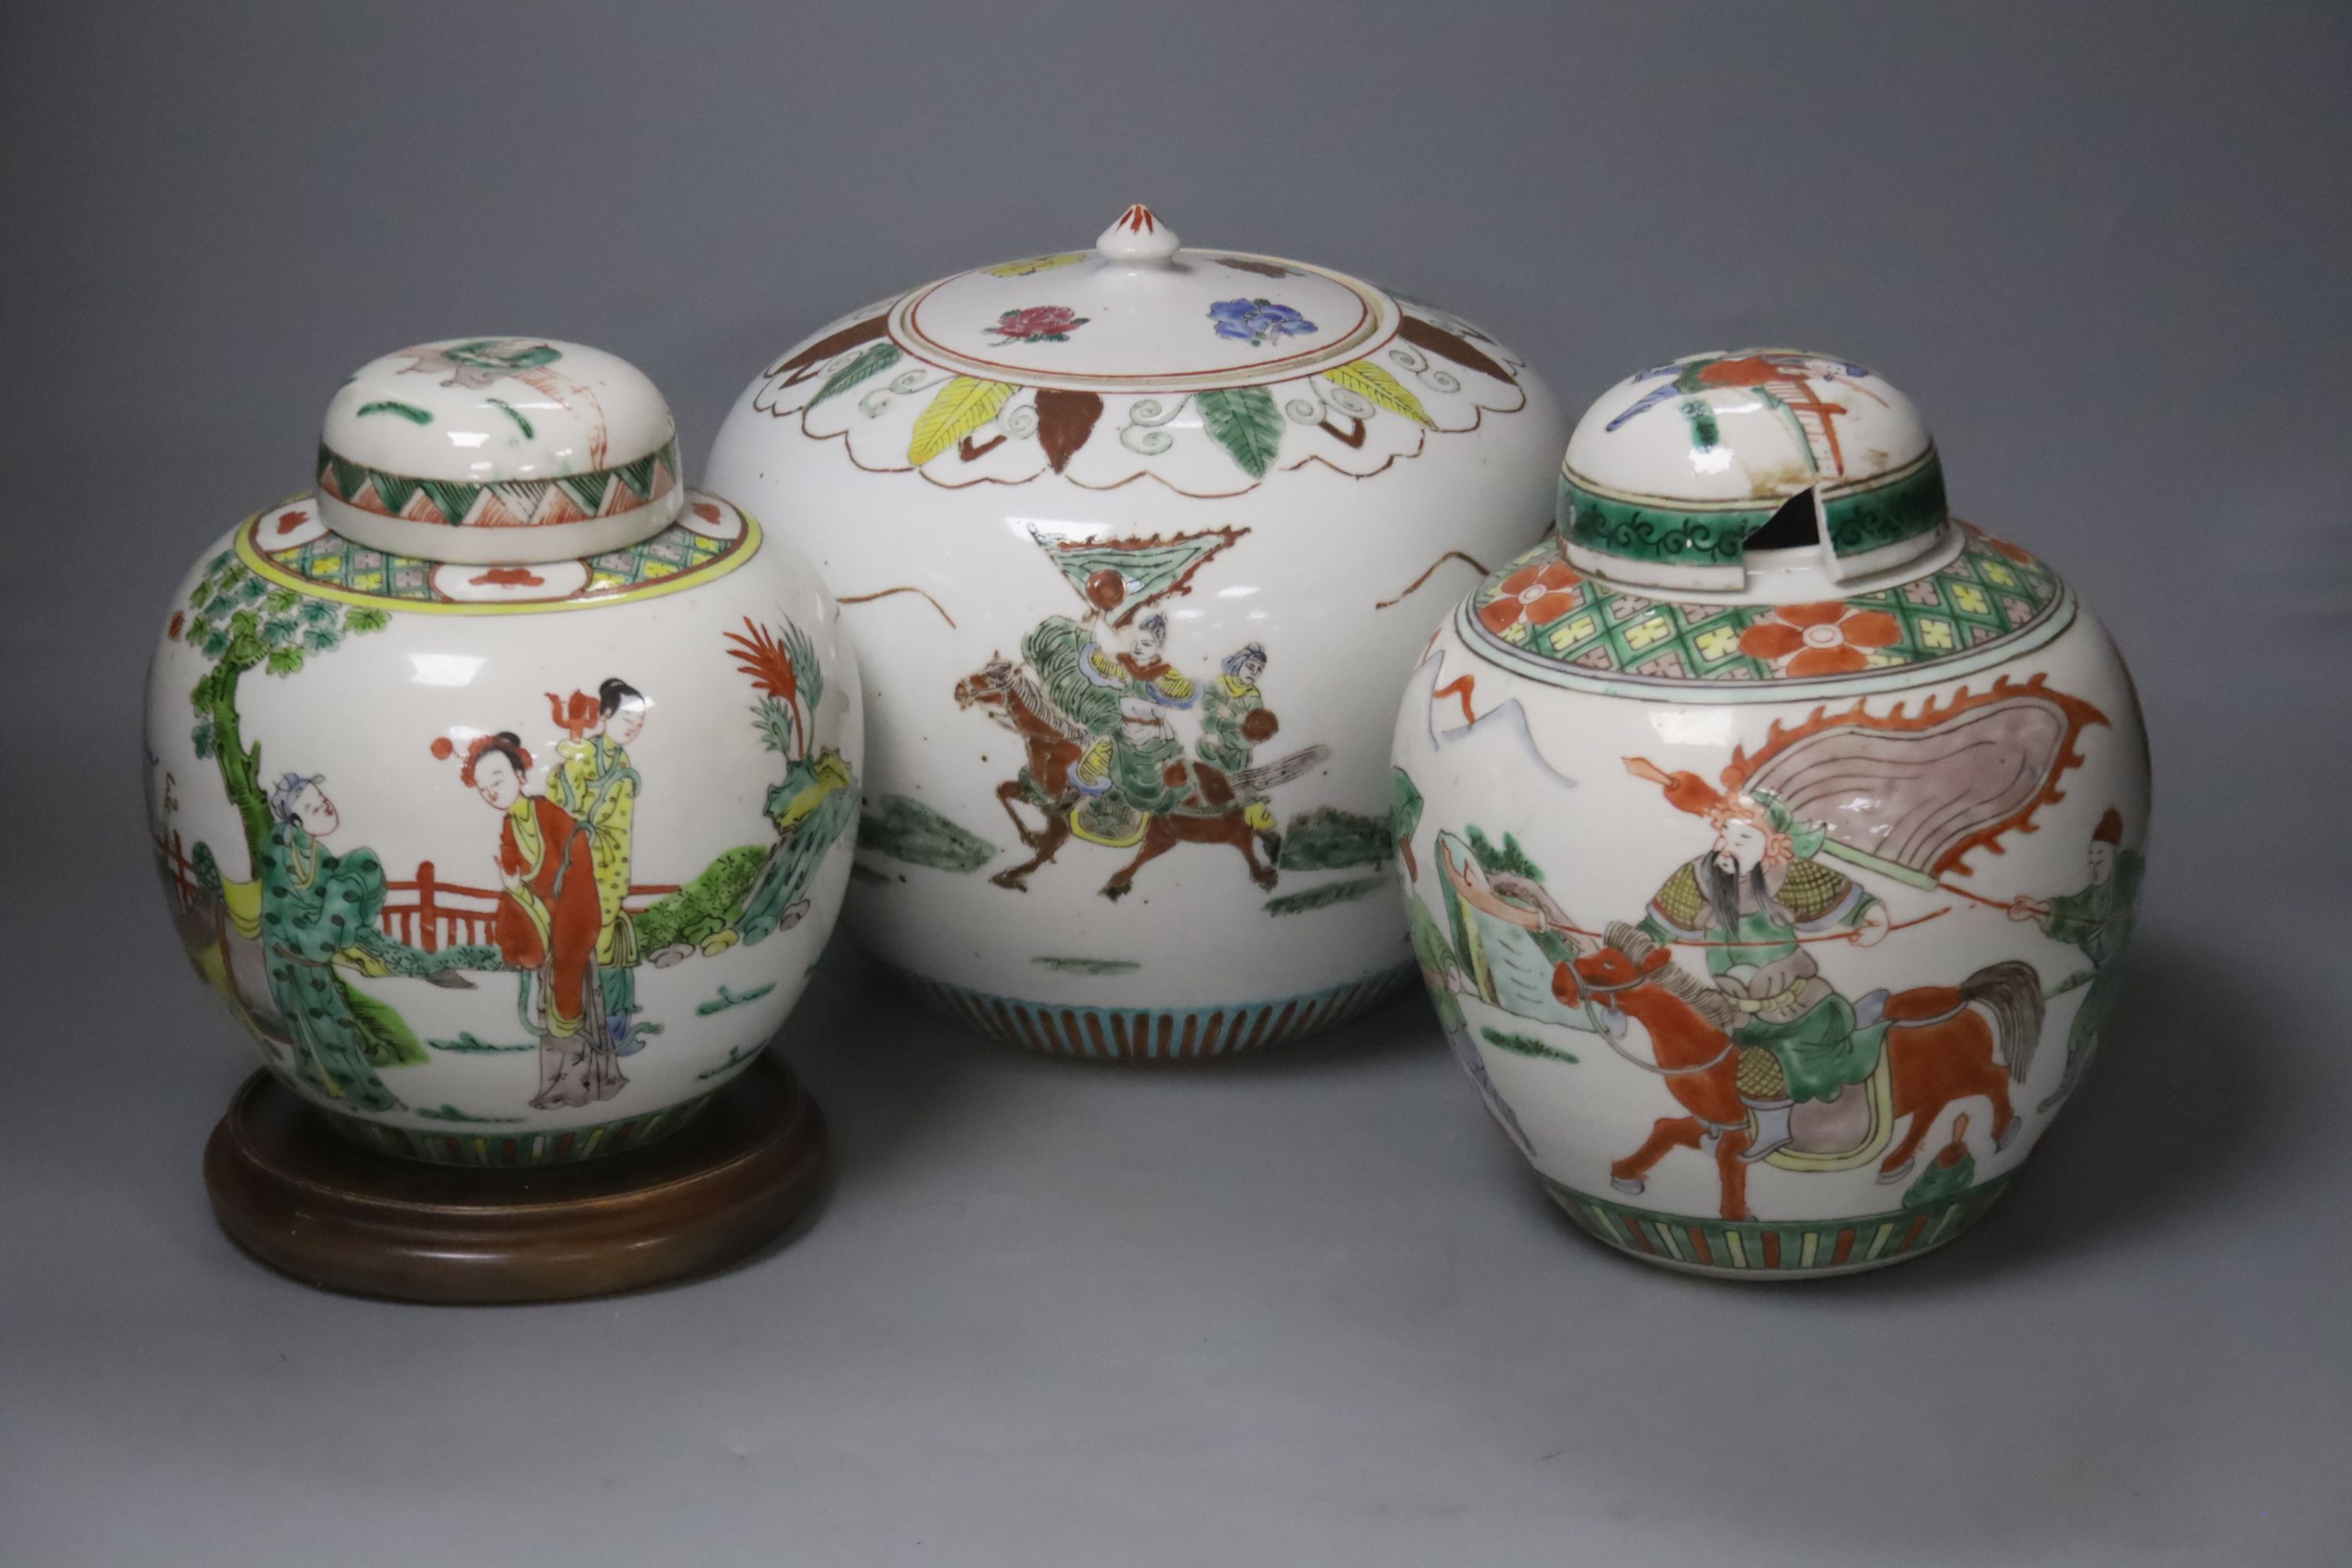 Three large 20th century Chinese porcelain famille verte jars and covers, tallest 21cm